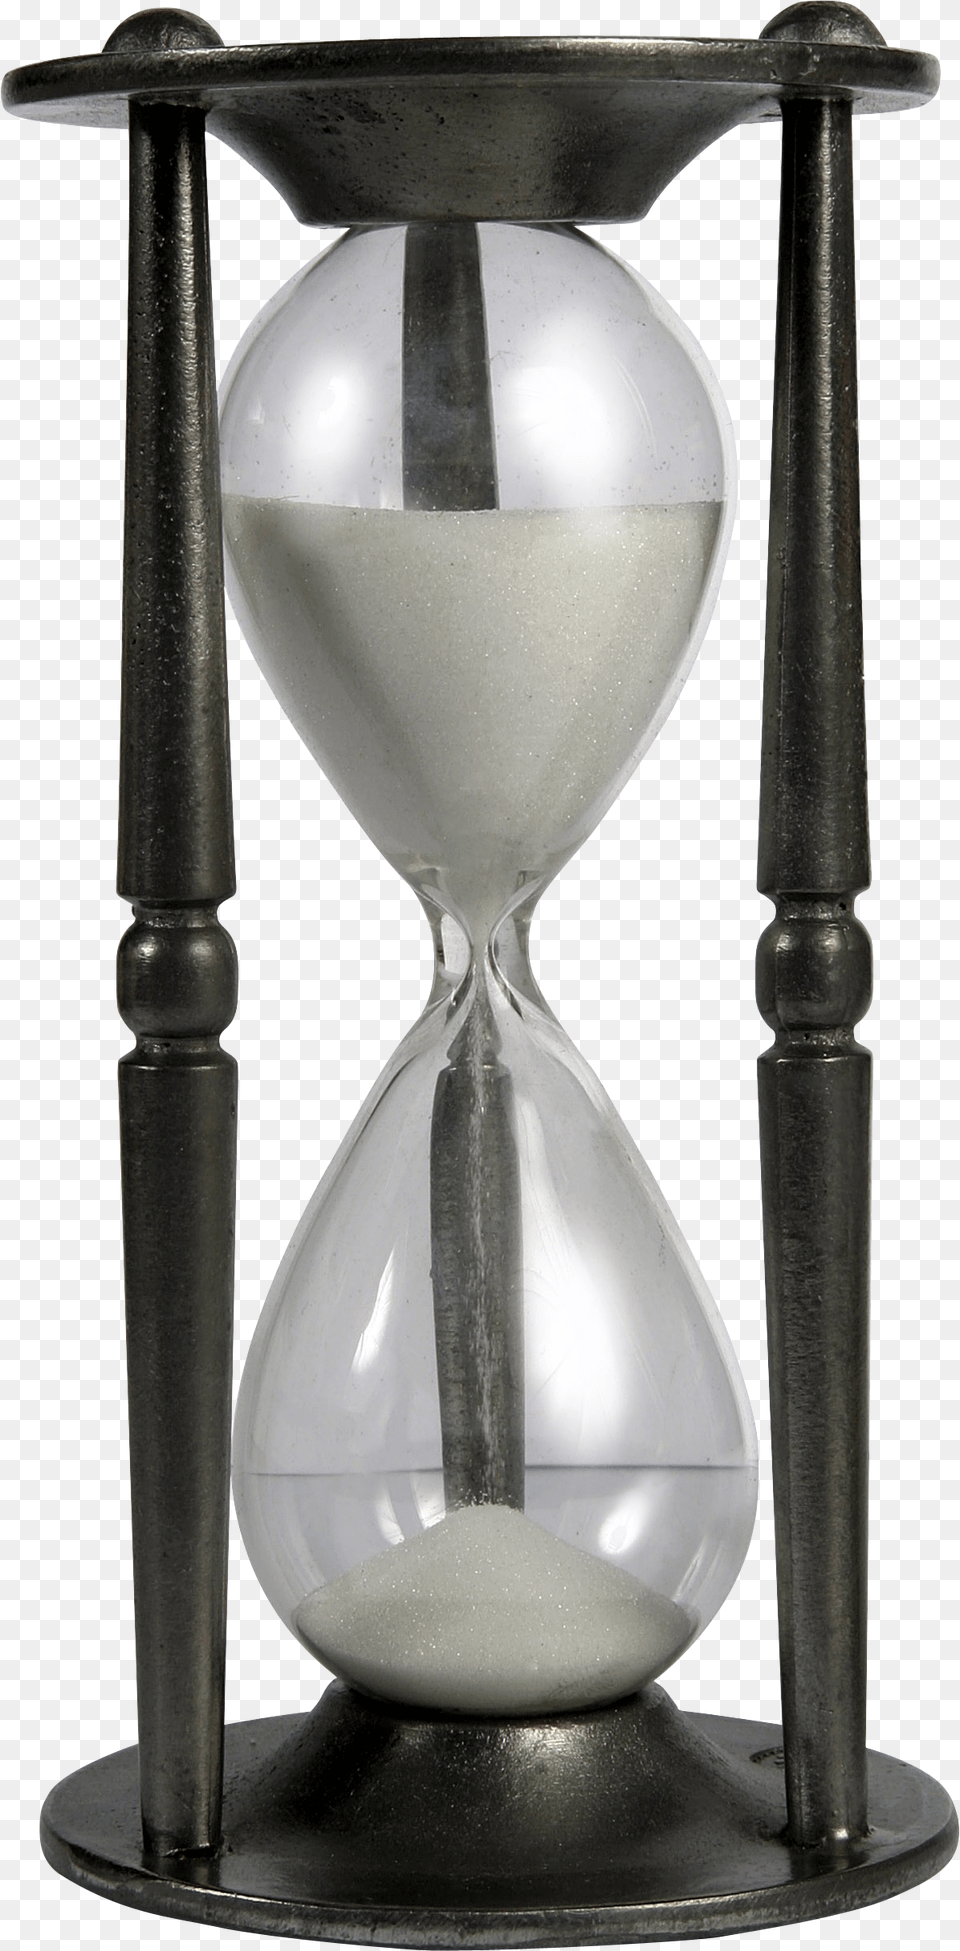 Hourglass Free Transparent Png